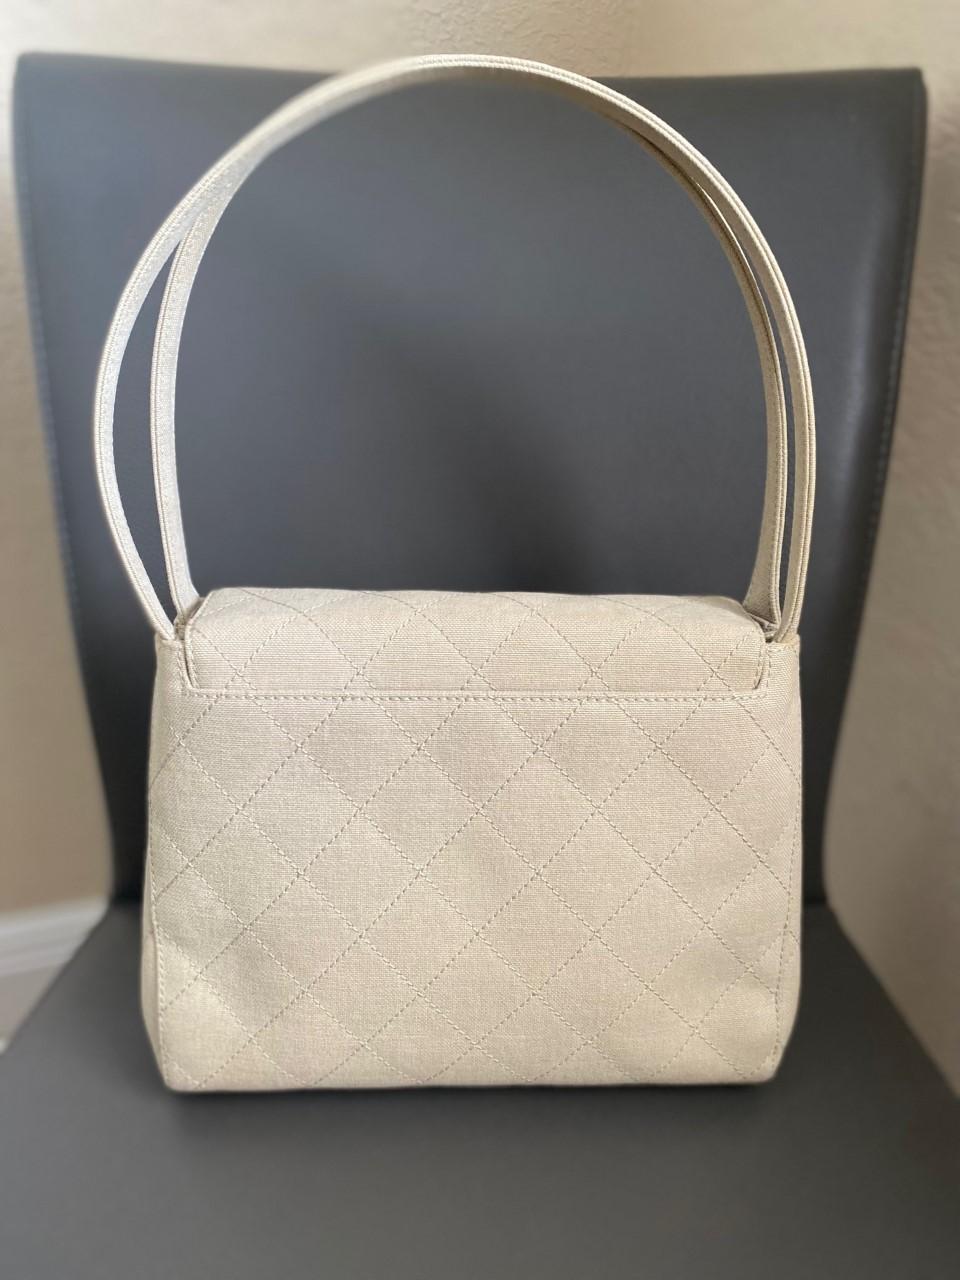 Circa 1999 with original tags attached. Never used.

24k gold plated hardware

Flat bottom opens to a large interior zipper closure. Lambskin interior lining.
exterior large back pocket. Double shoulder straps.

Comes with dustbag and authenticity